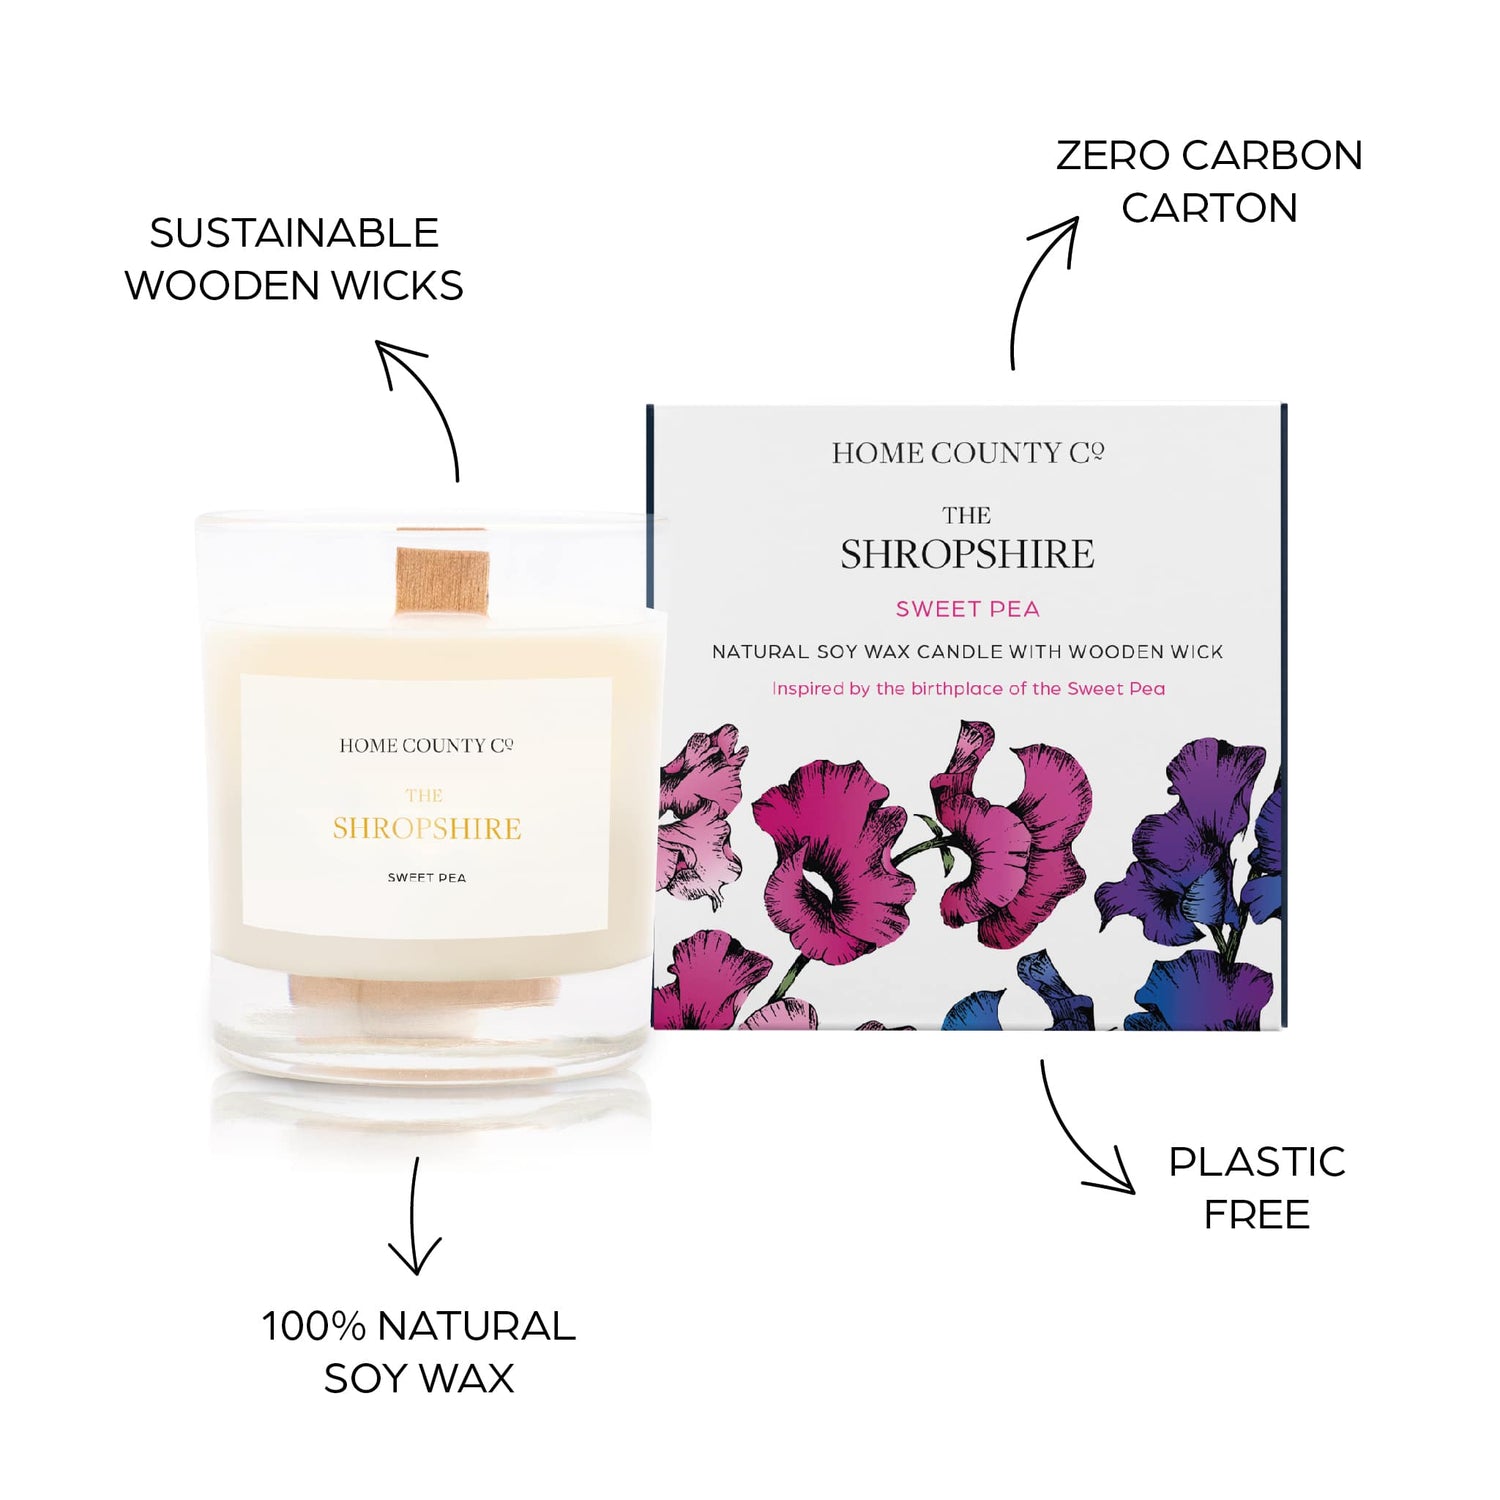 Sustainable candle credentials are shown around the sweet pea scented candle image - sustainable wooden wicks, zero carbon carton, 100% natural soy wax, plastic free